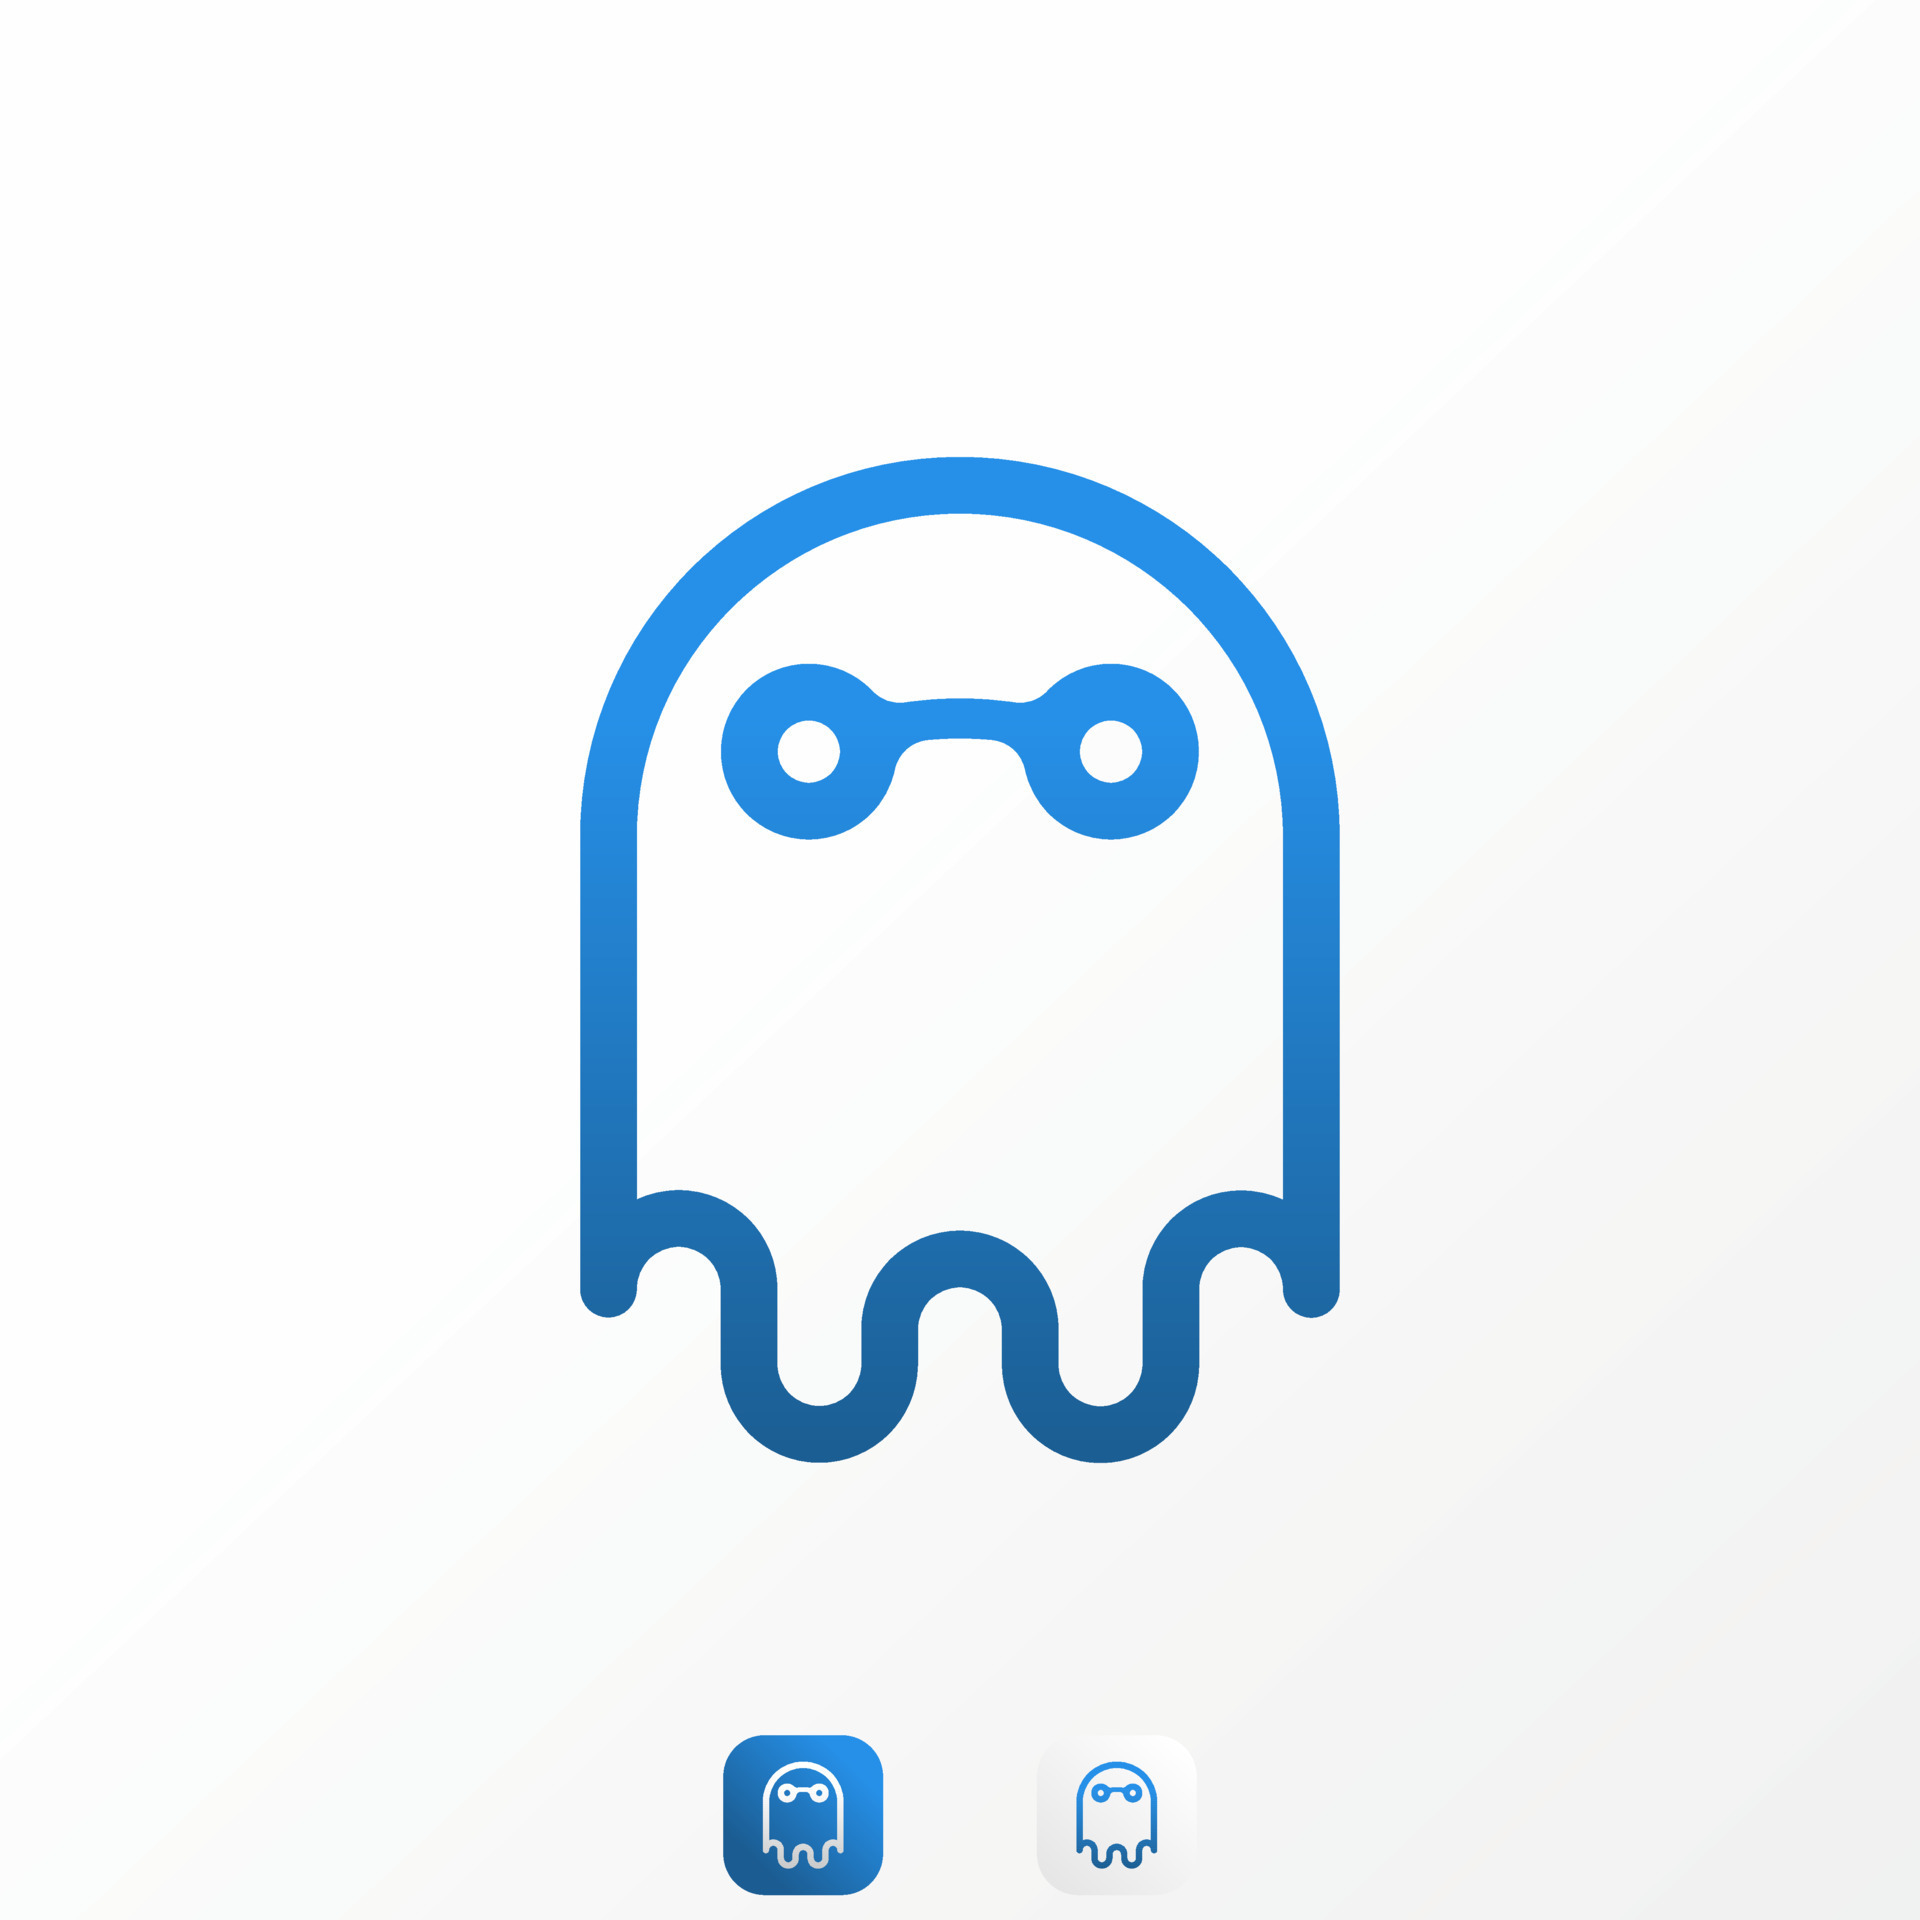 Simple but unique funny ghost in line with tech or network sign image  graphic icon logo design abstract concept vector stock. Can be used as  symbol related to computer or hacker 13257194